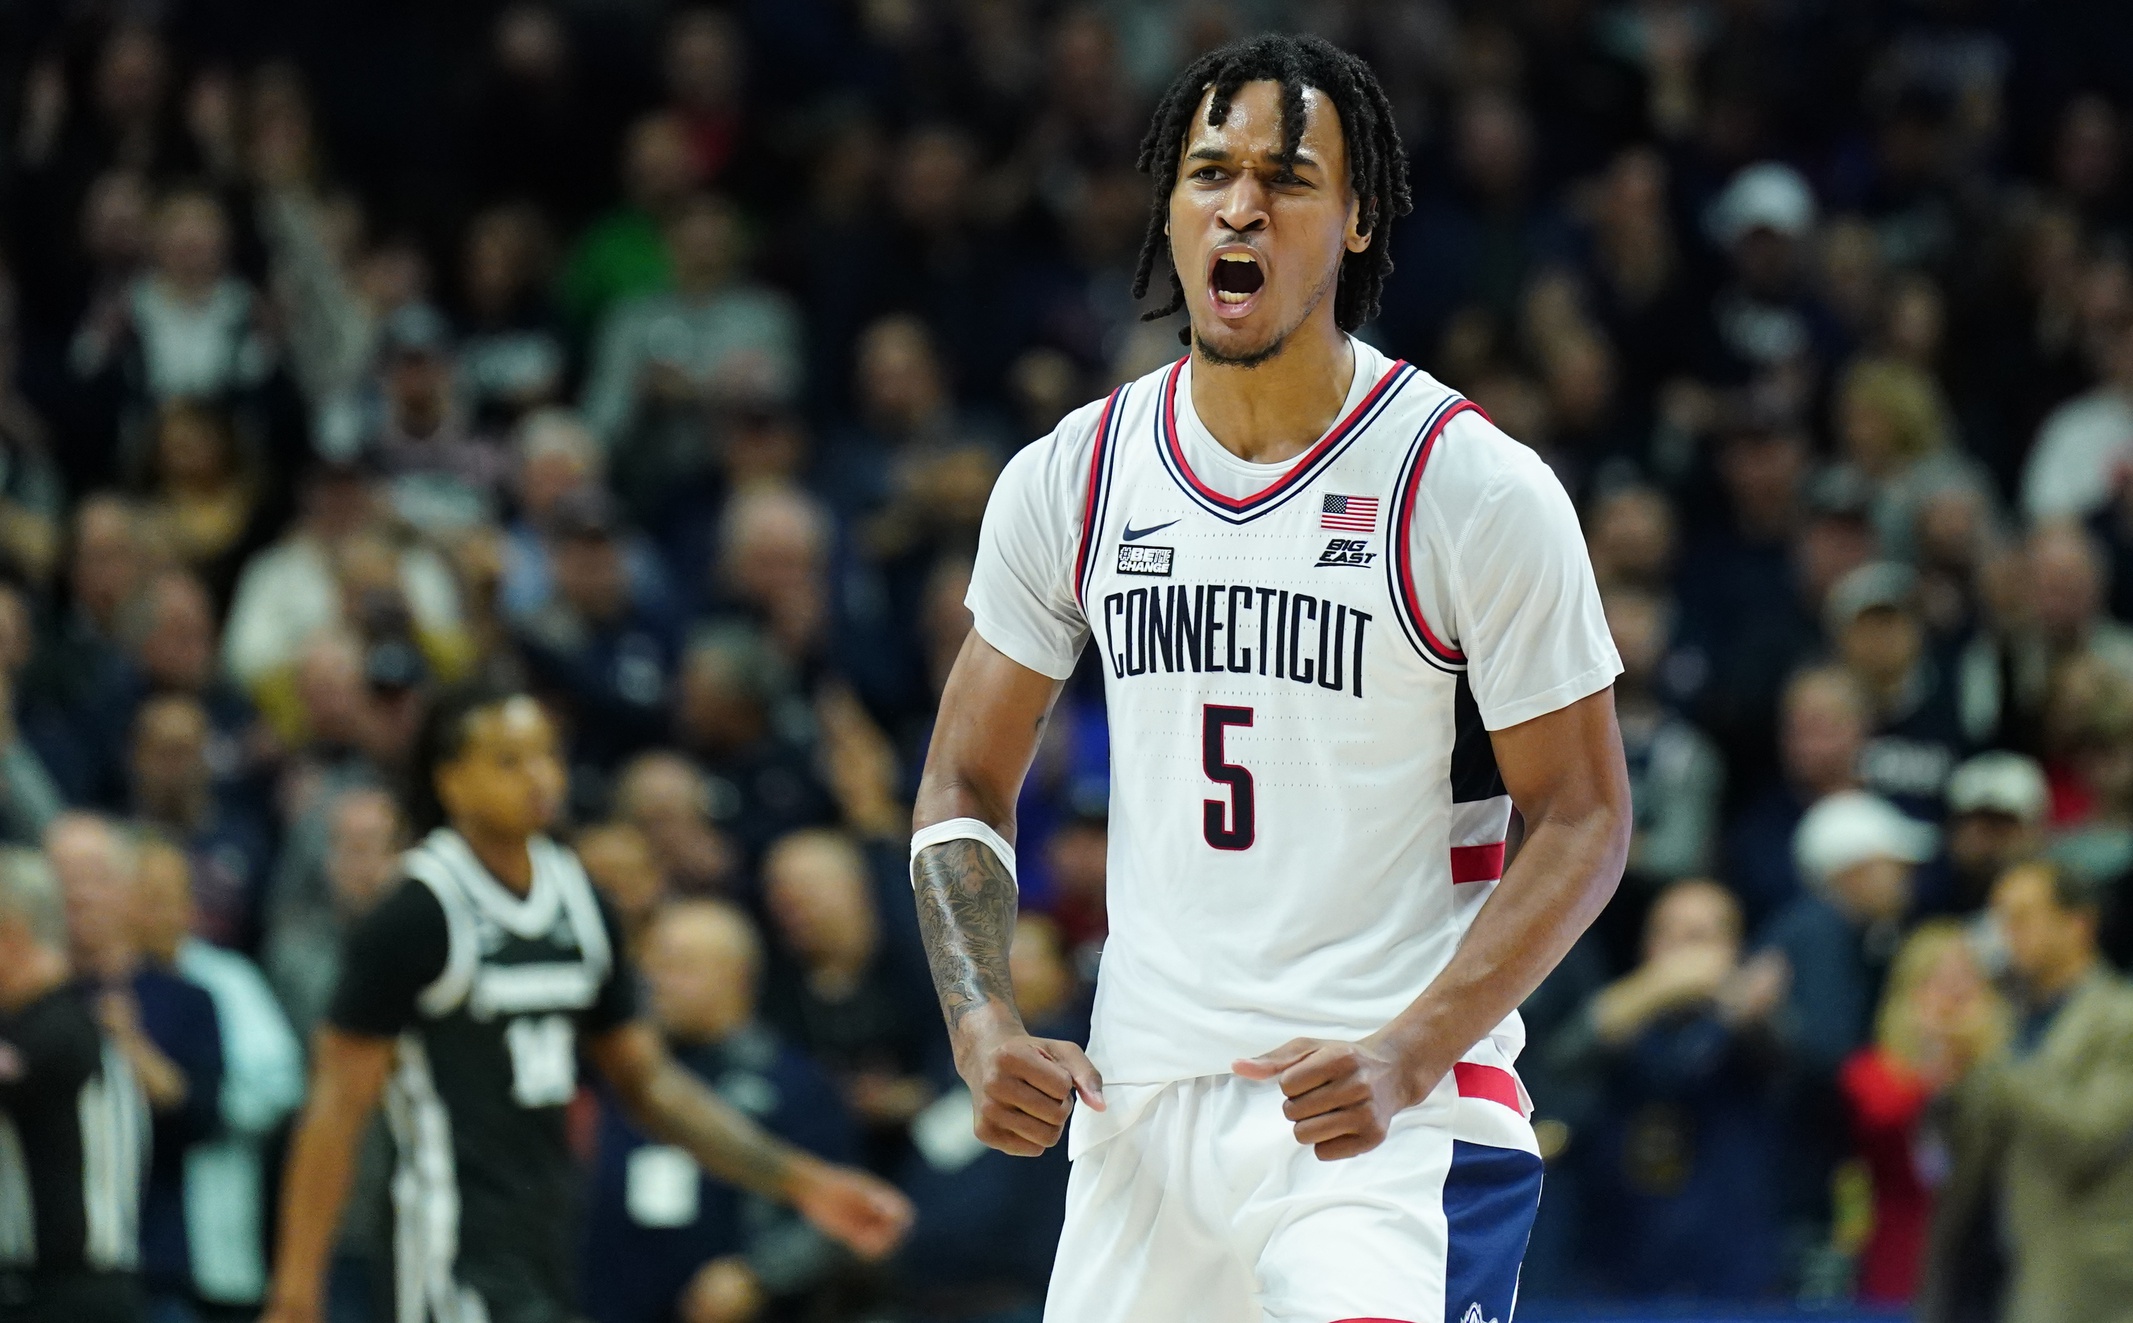 Stephon Castle is taking his game to new heights for the UConn Huskies.